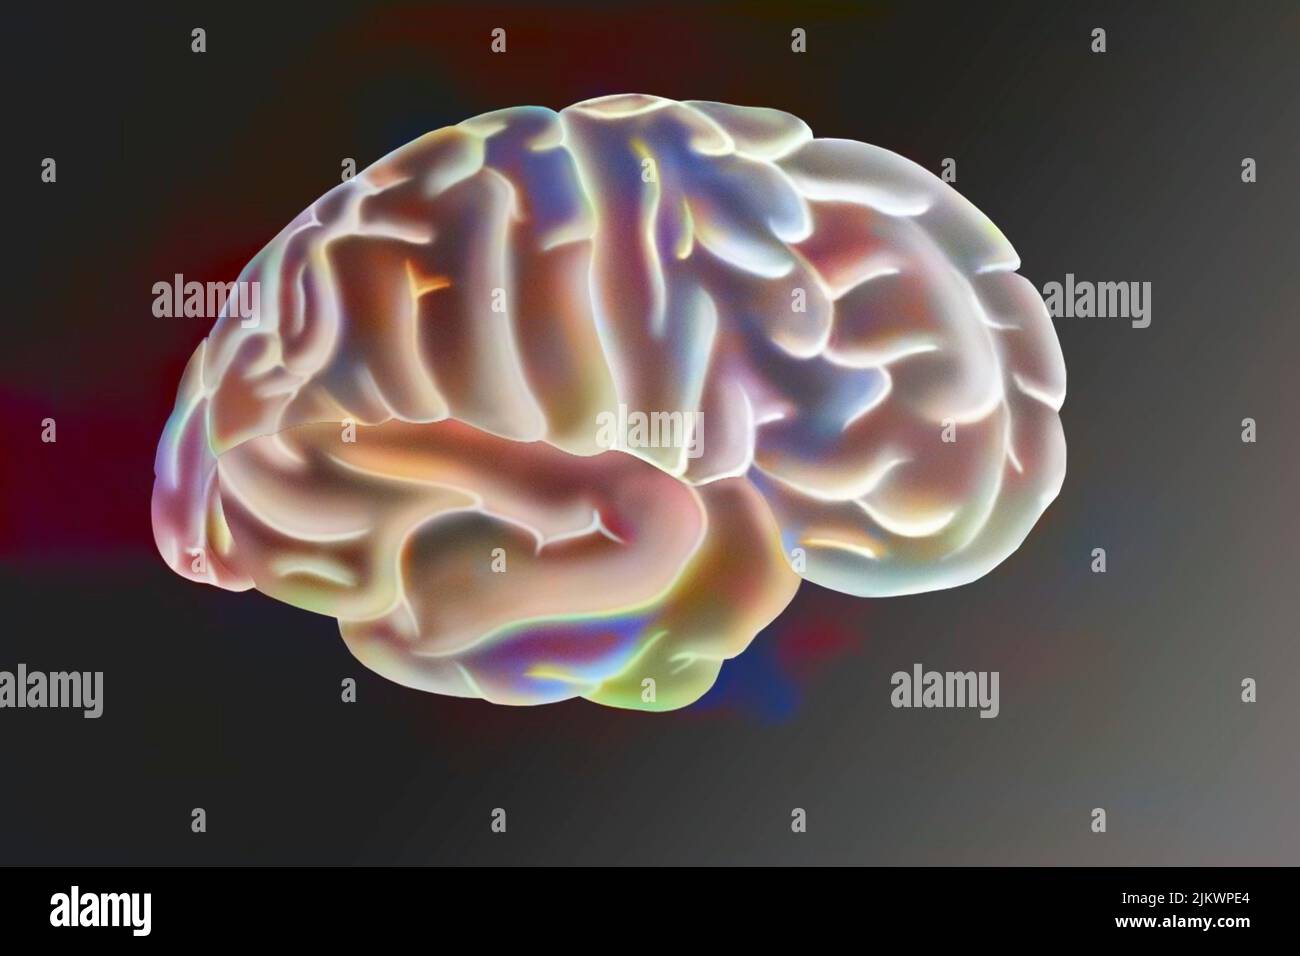 Drawing of a human brain and its different areas. Stock Photo